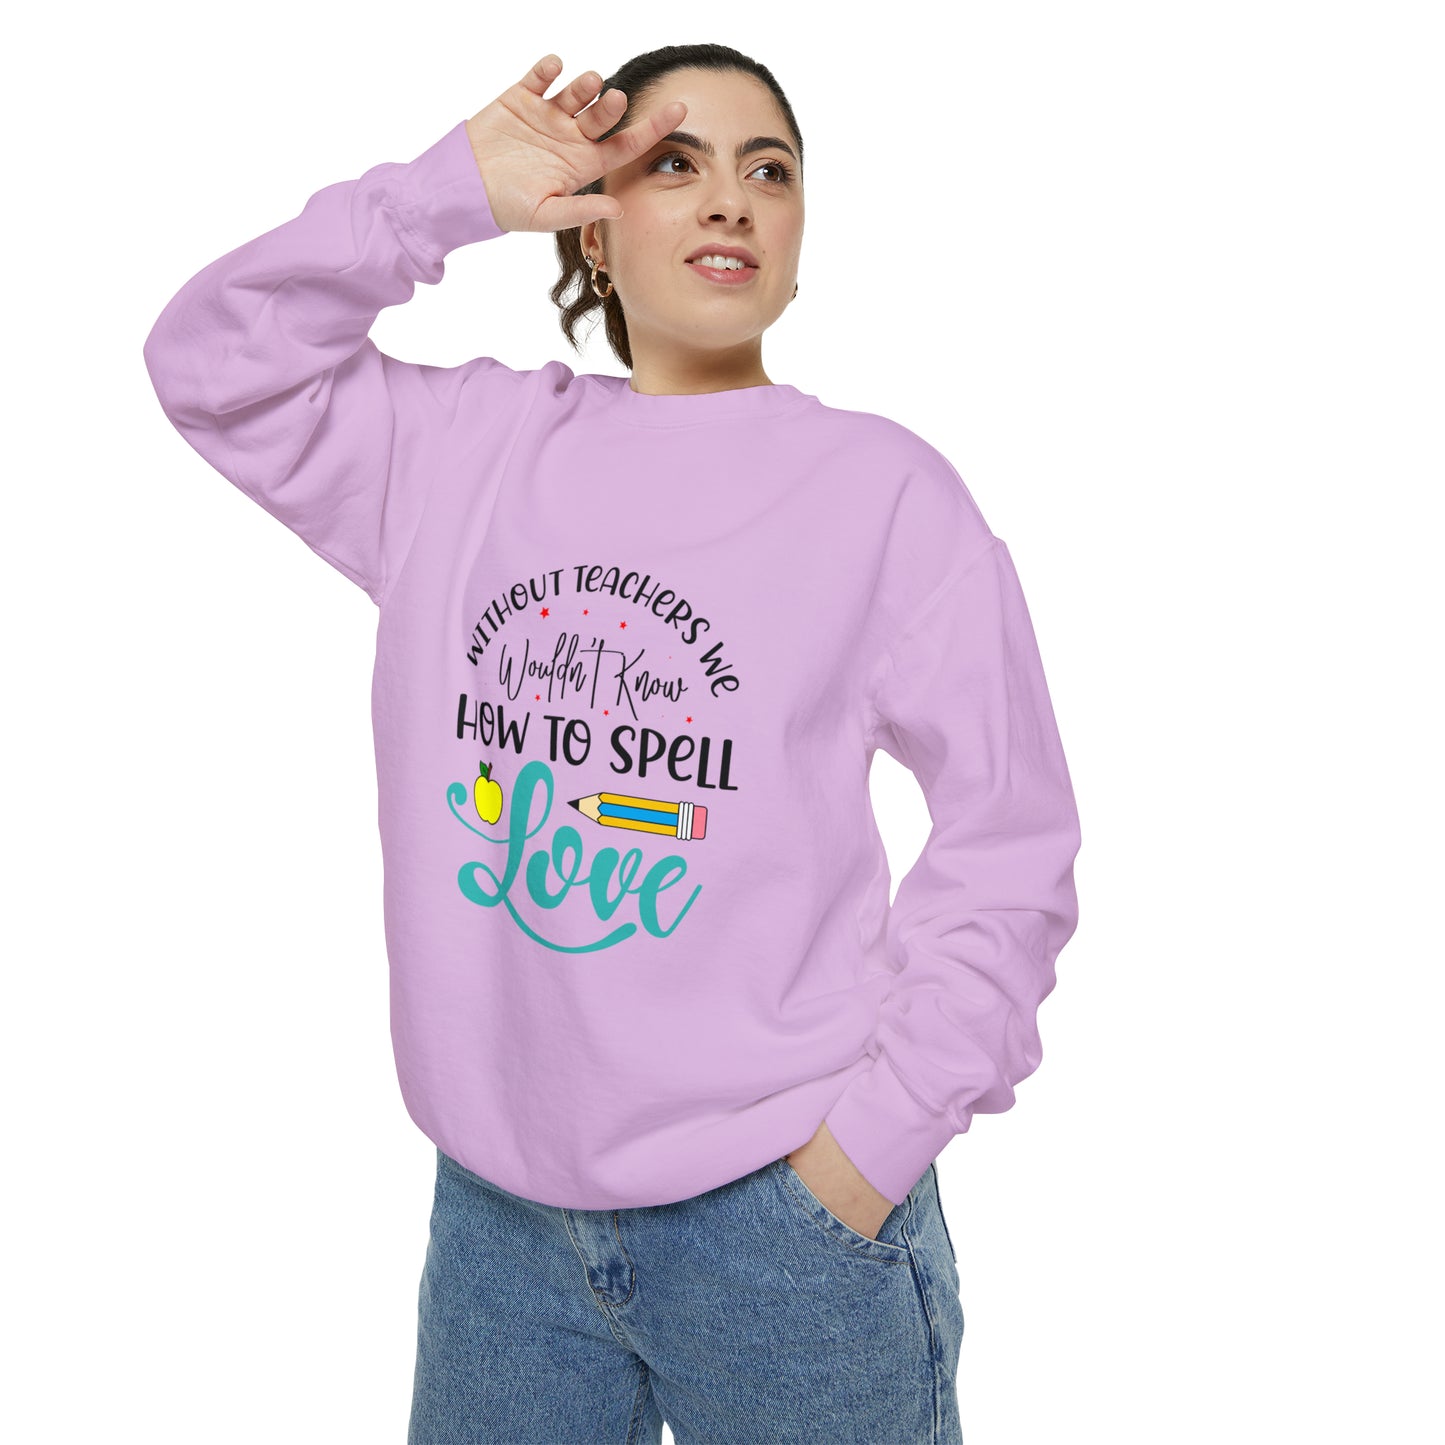 Without Teachers We Wouldn't Know How to Spell LOVE Unisex Garment-Dyed Sweatshirt